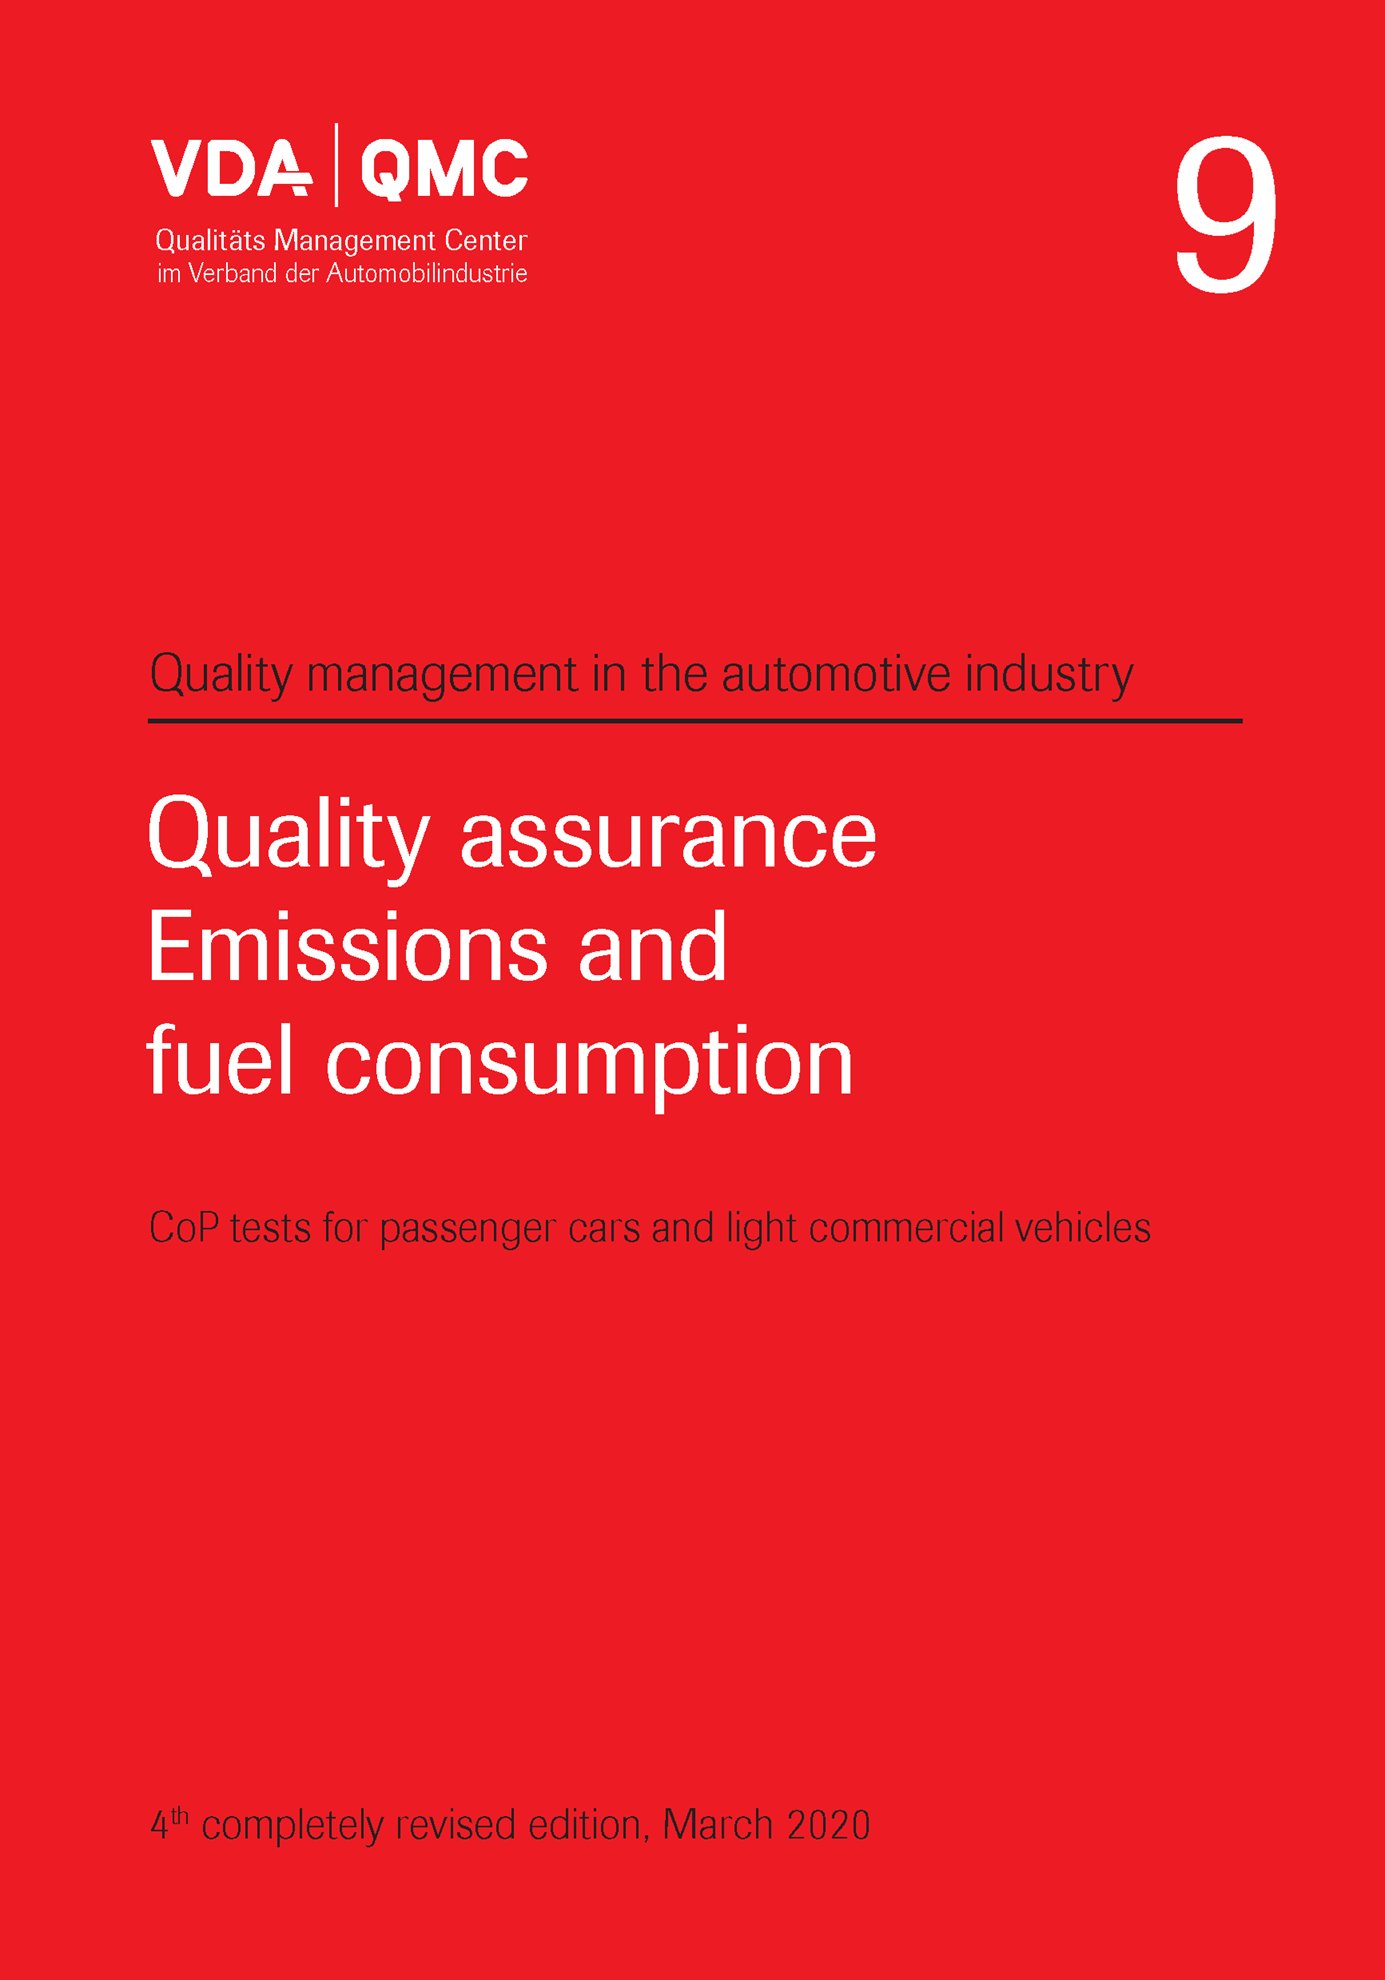 Náhľad  VDA Volume 9
 Quality Assurance
 Emissions and Fuel Consumption
 CoP tests on passenger cars and light commercial vehicles, 4th, completely revised edition, March 2020 1.3.2020